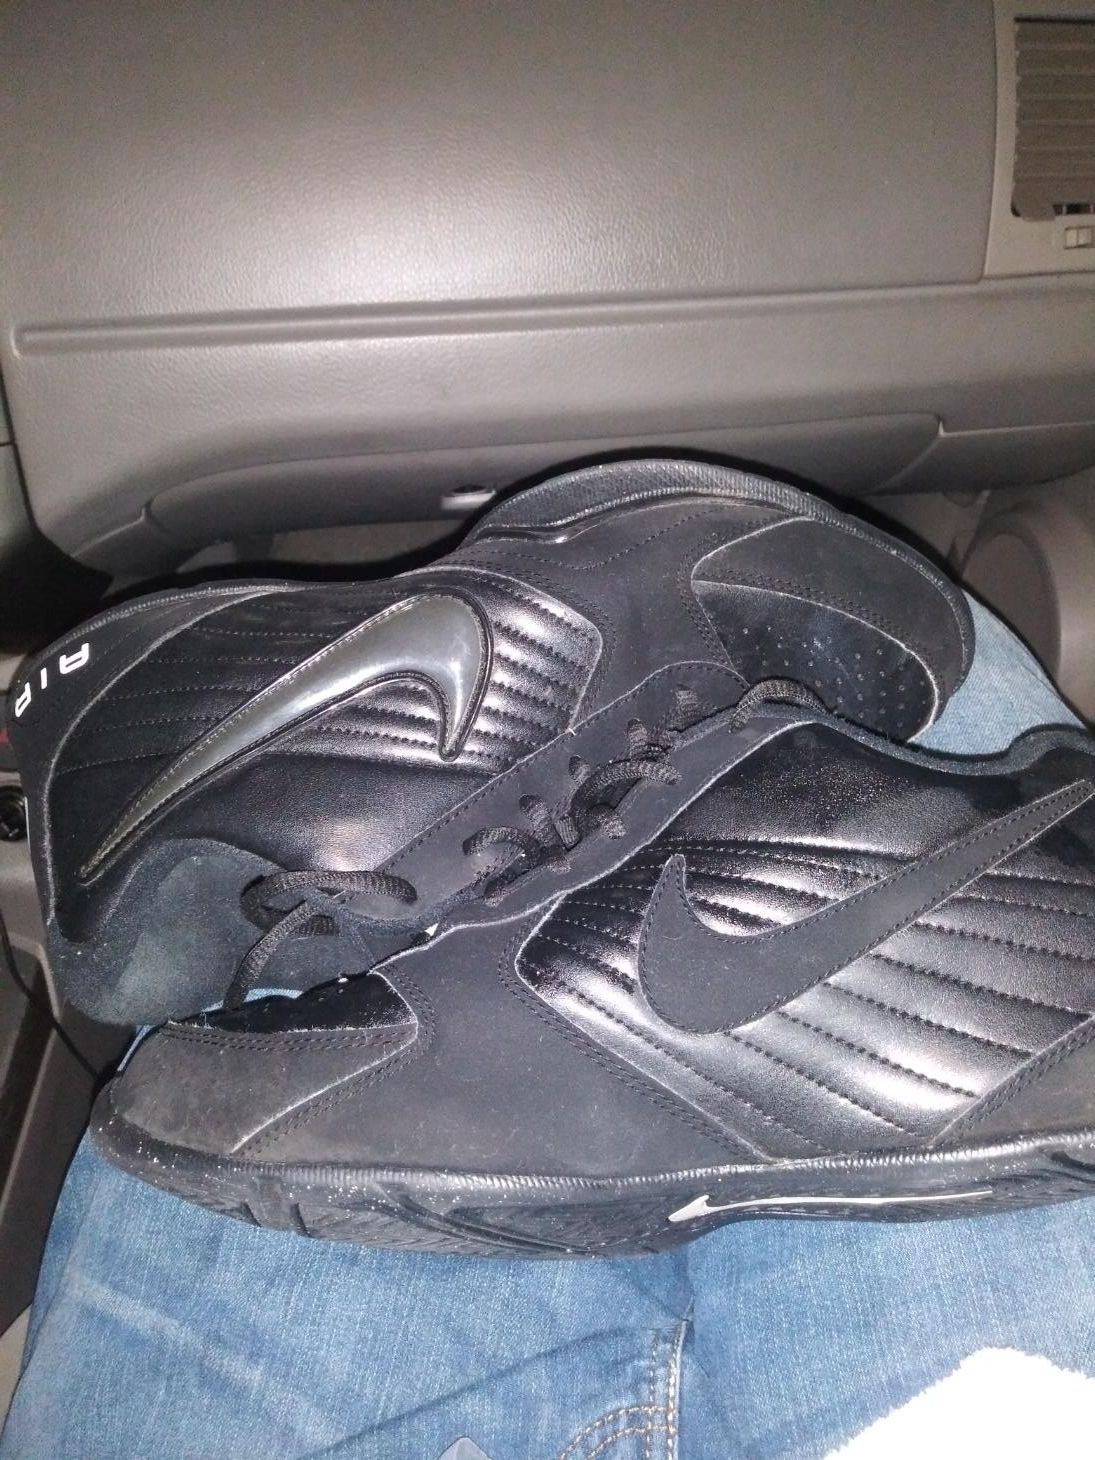 Mens Nike shoes (size 10.5)